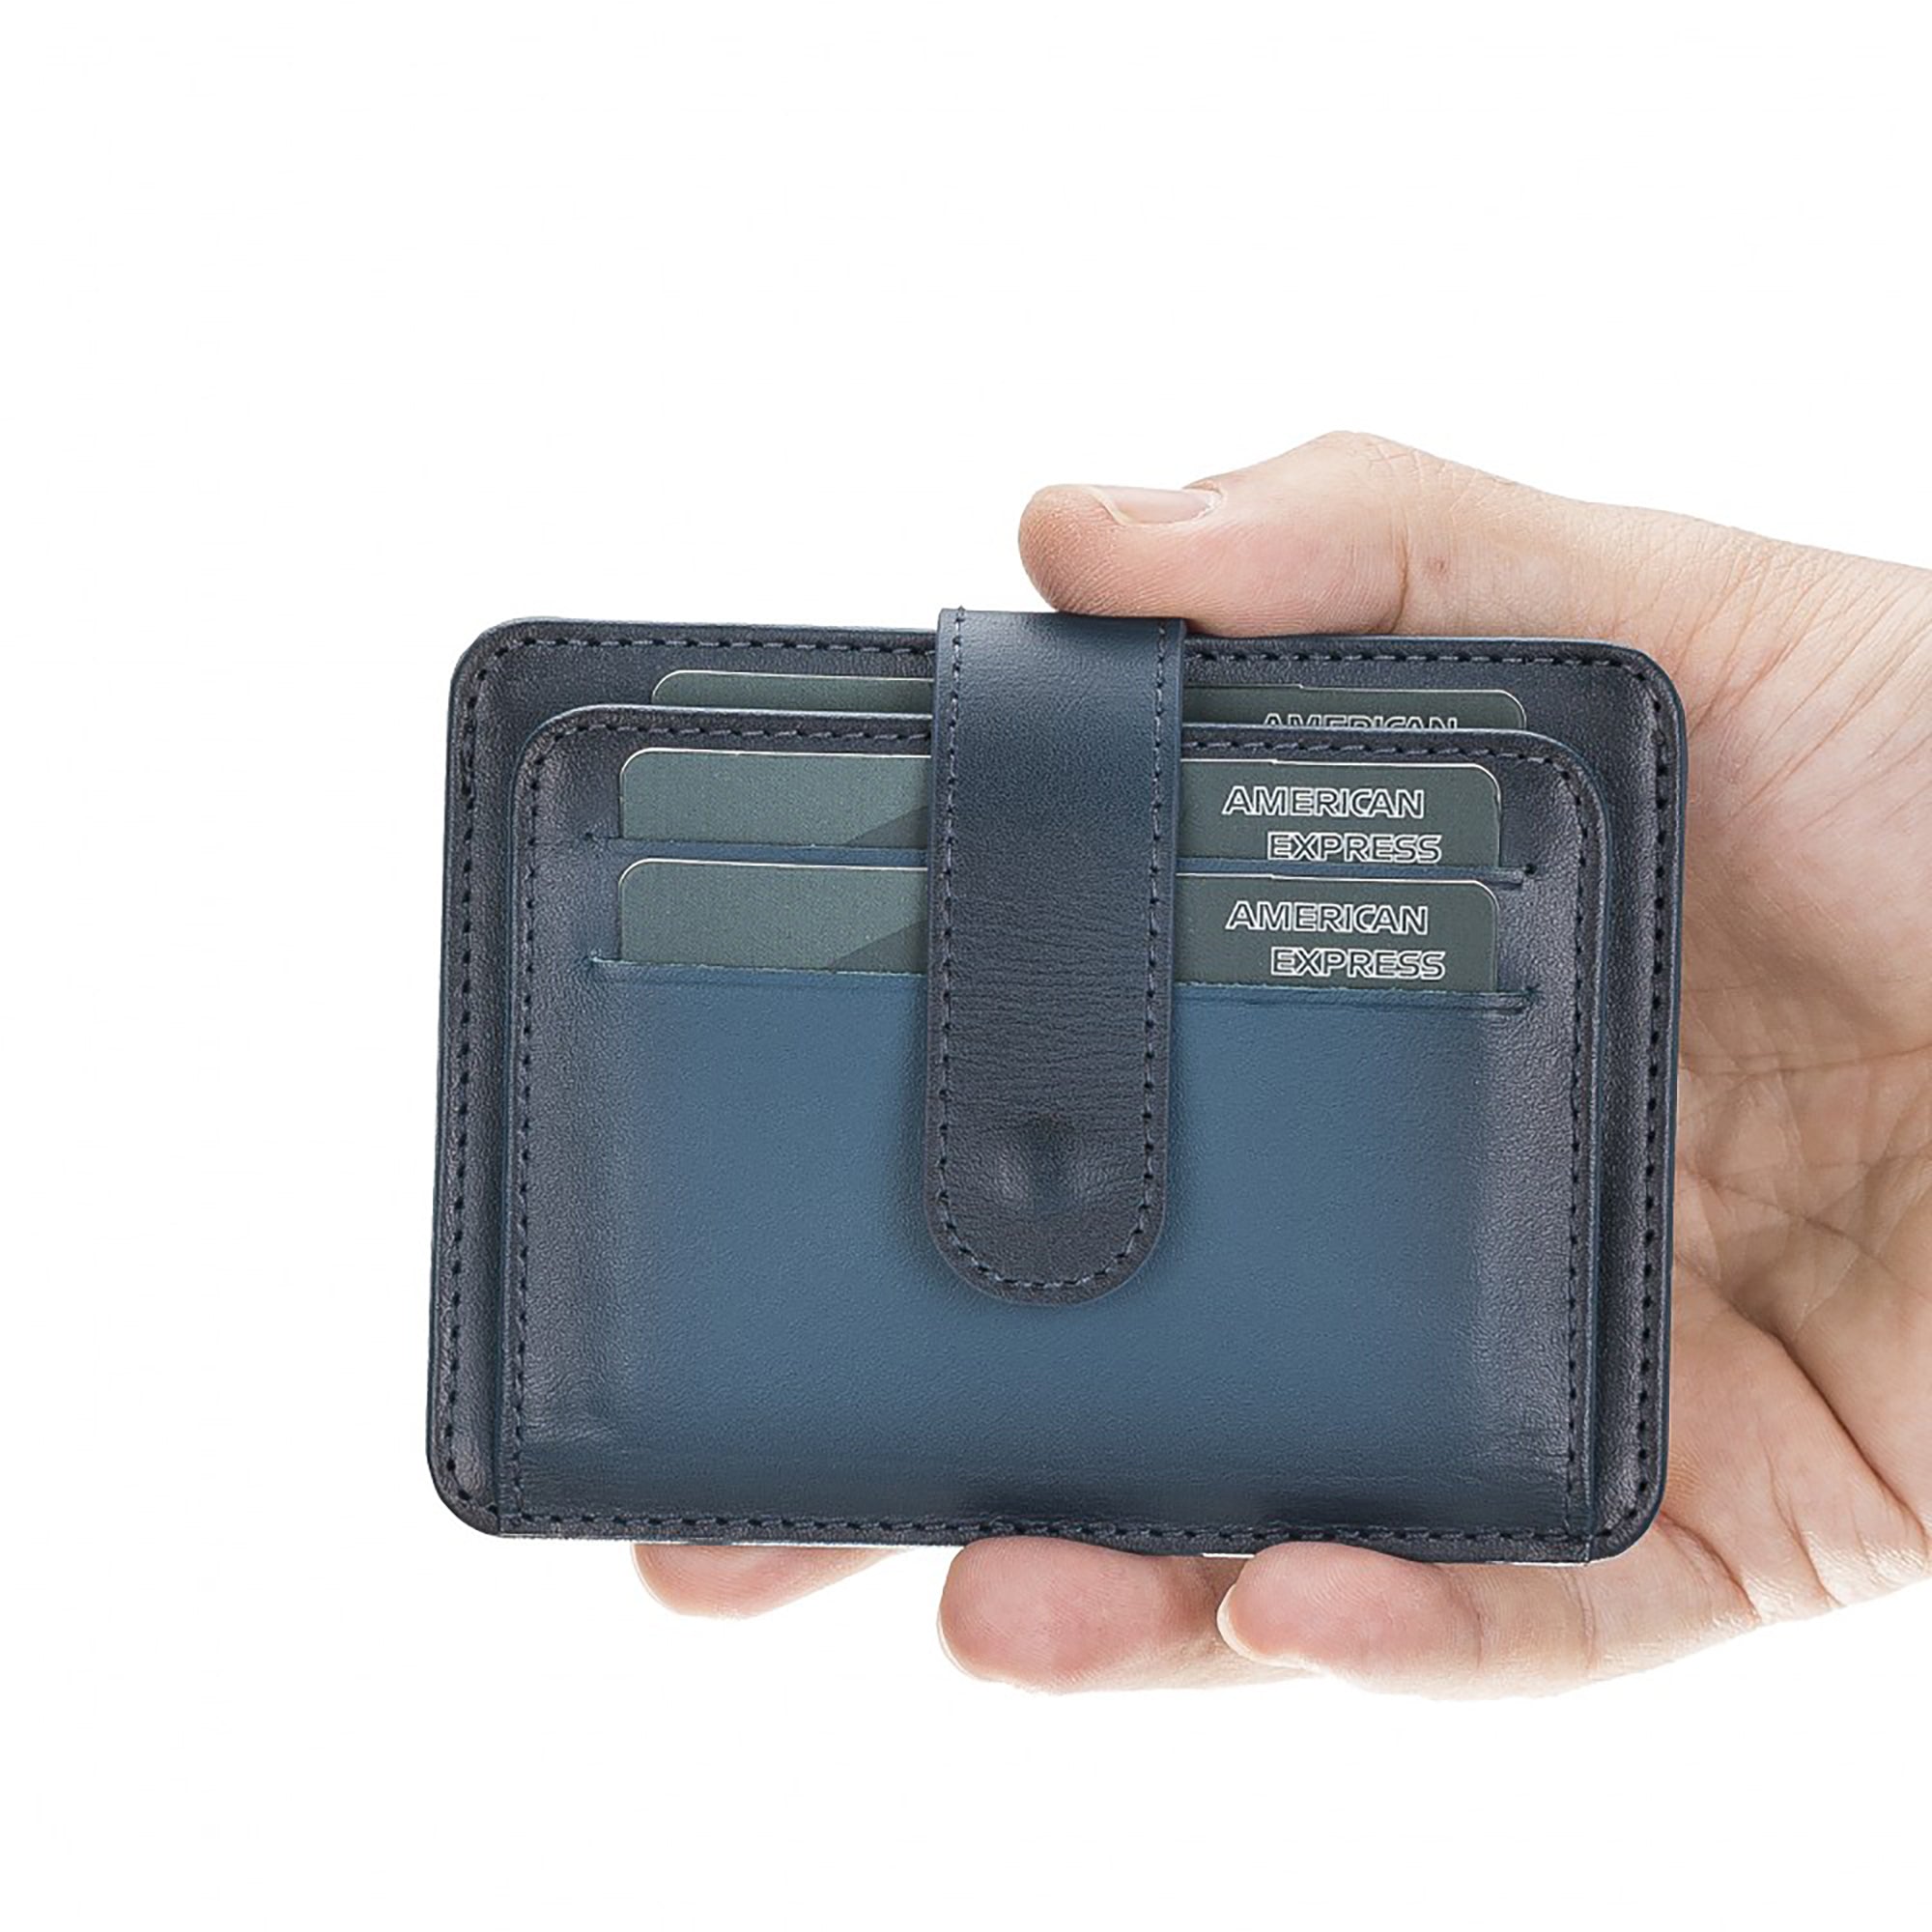 Adelao Leather Men's Bifold Wallet - BLUE - saracleather